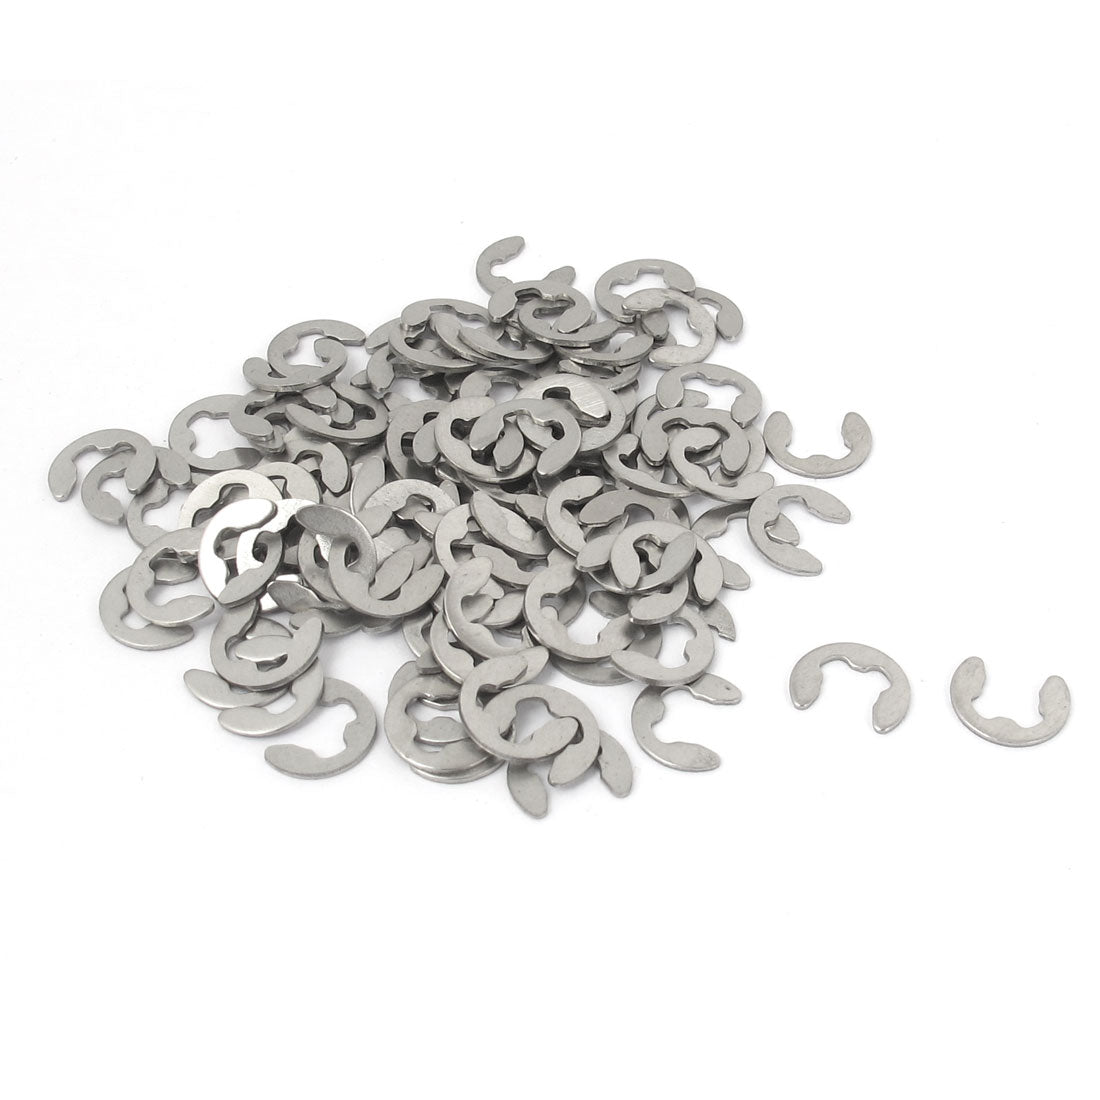 uxcell Uxcell 100pcs 304 Stainless Steel Fastener External Retaining Ring E-Clip Circlip 5mm